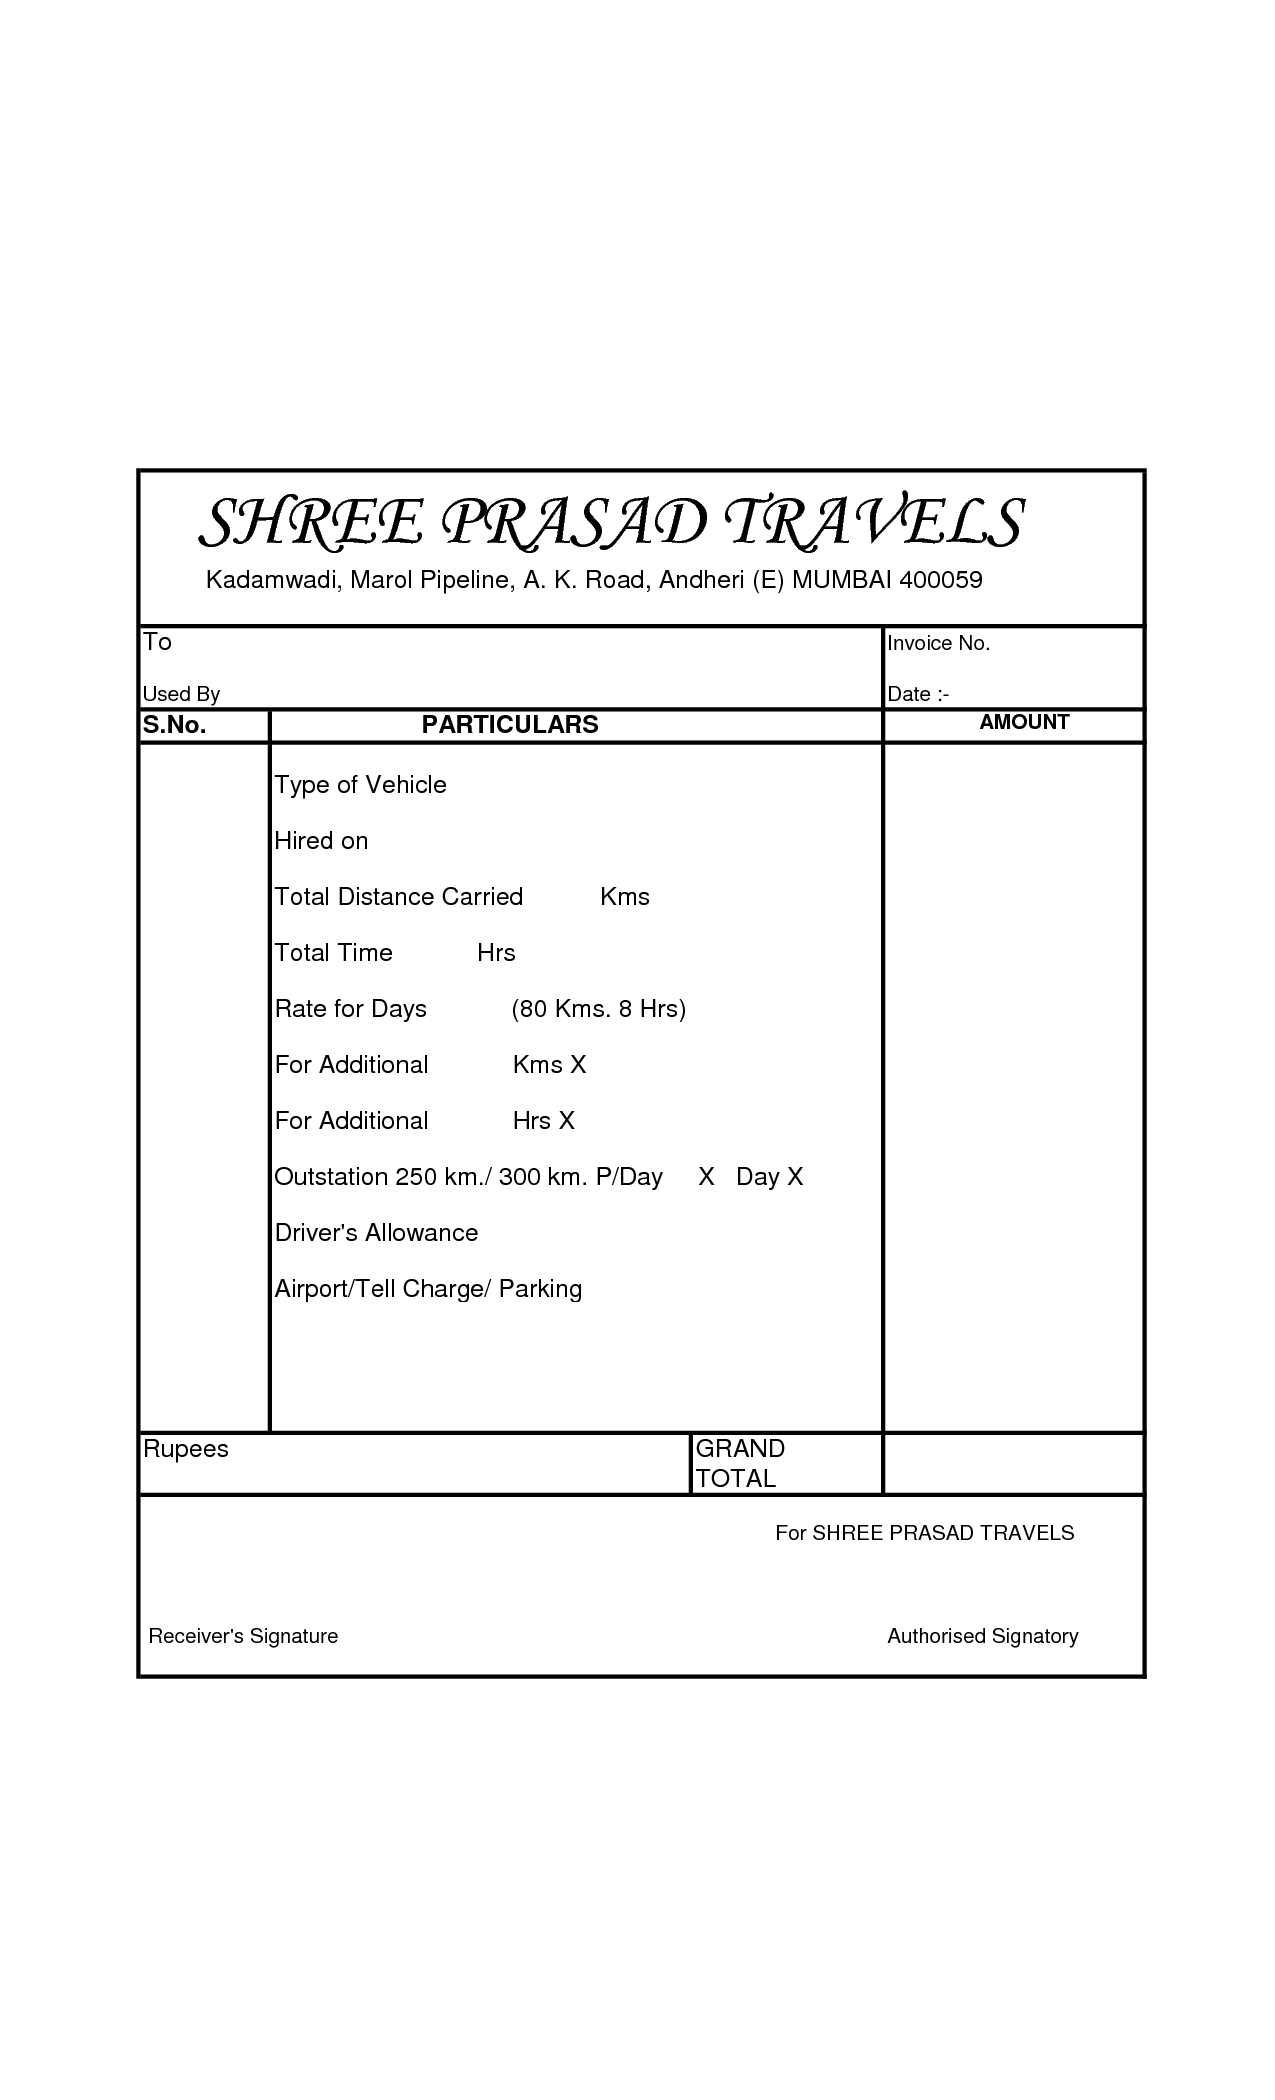 download sample tours and travels receipt weimoncurlcentnas59 travel agency invoice format